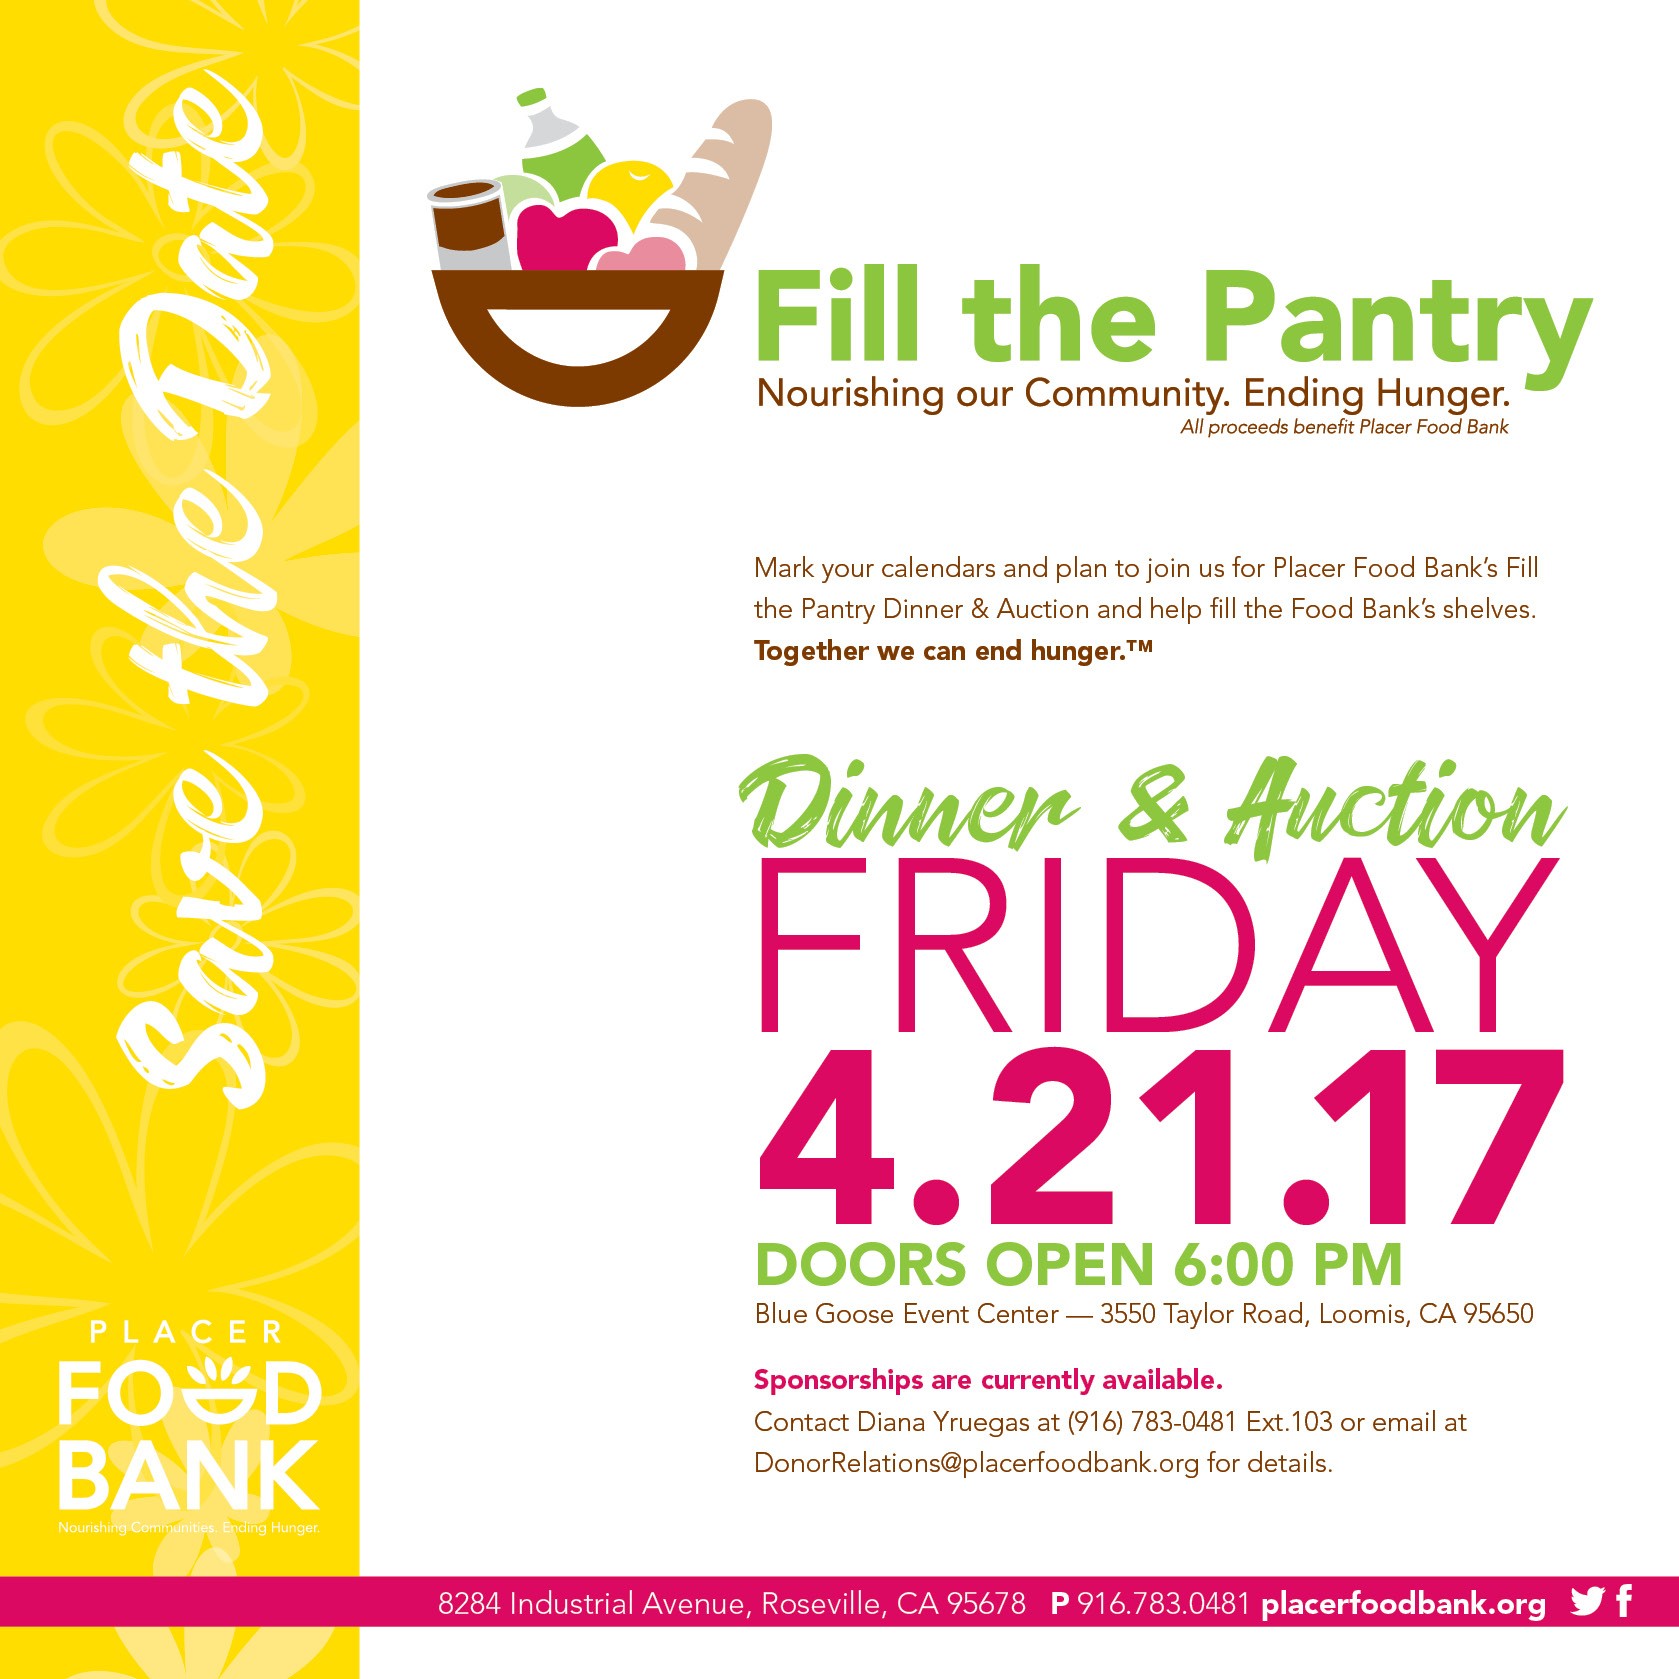 Fill the Pantry Dinner & Auction